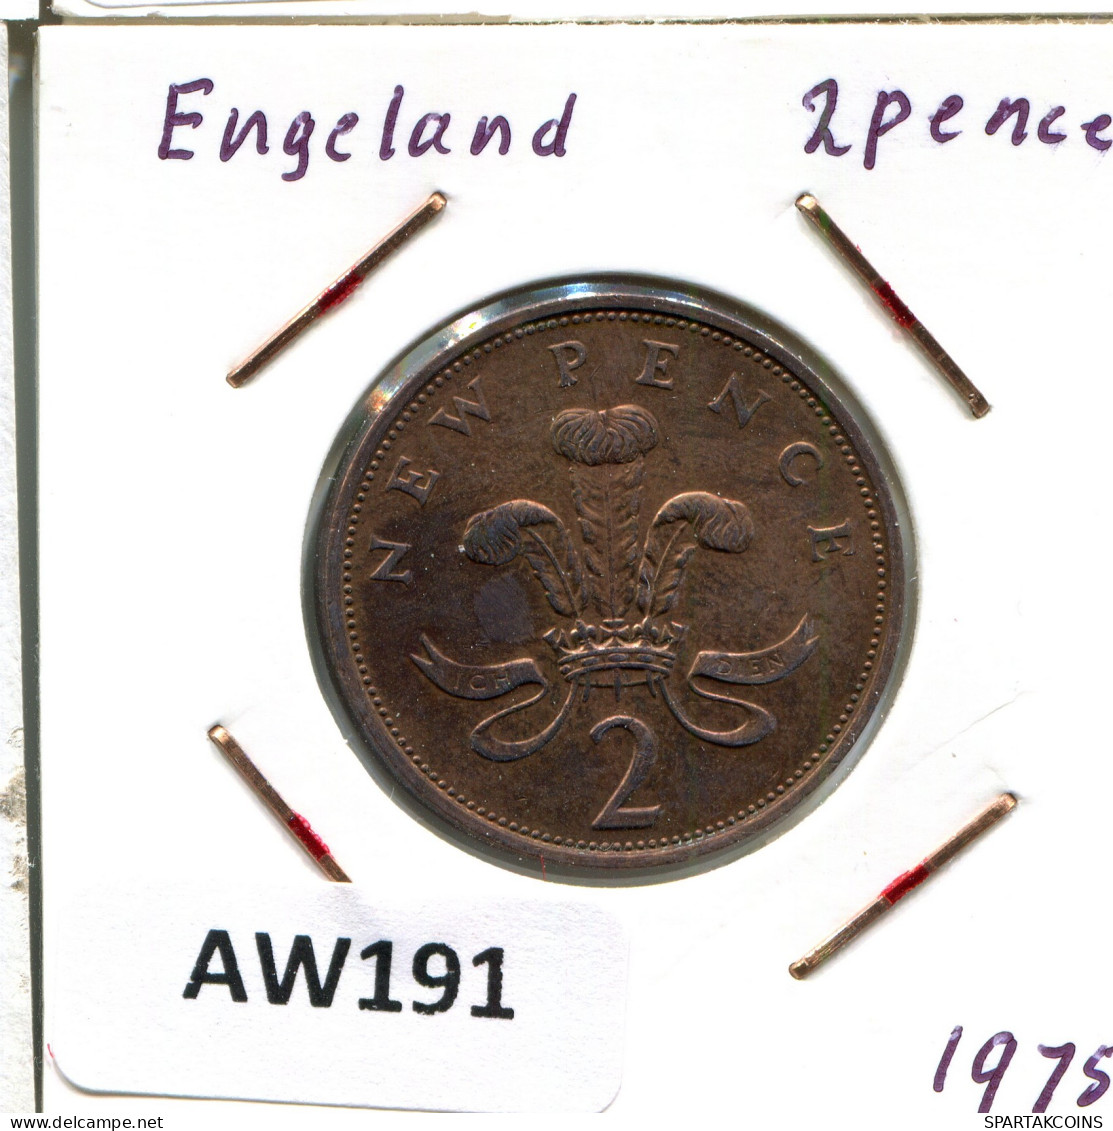 2 NEW PENCE 1975 UK GRANDE-BRETAGNE GREAT BRITAIN Pièce #AW191.F - 2 Pence & 2 New Pence